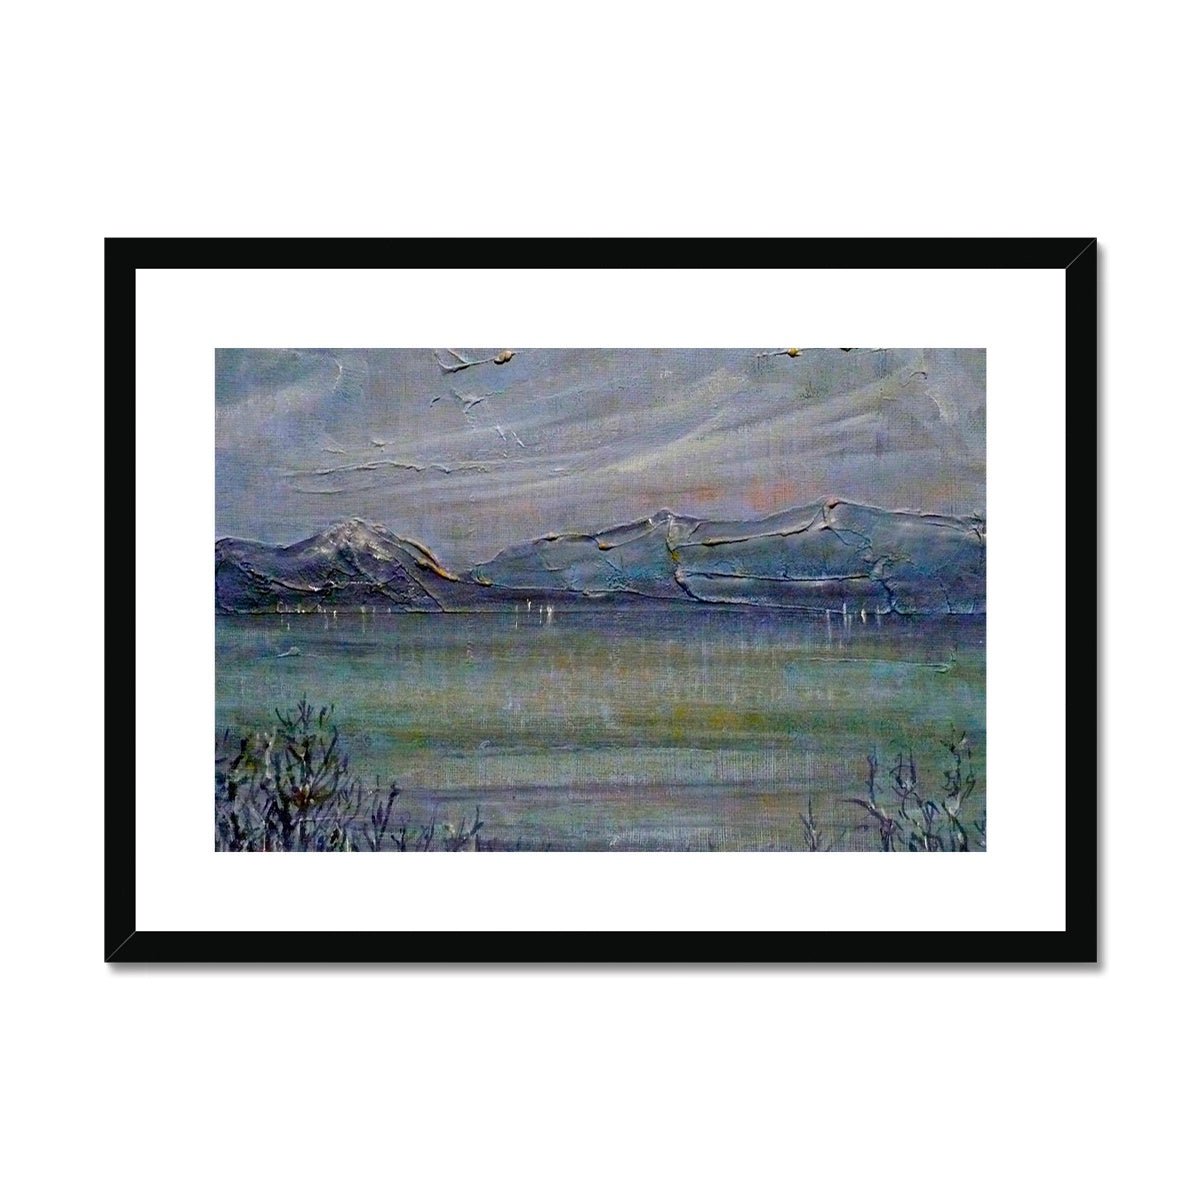 Loch Morlich Moonlight Painting | Framed & Mounted Prints From Scotland-Framed & Mounted Prints-Scottish Lochs & Mountains Art Gallery-A2 Landscape-Black Frame-Paintings, Prints, Homeware, Art Gifts From Scotland By Scottish Artist Kevin Hunter